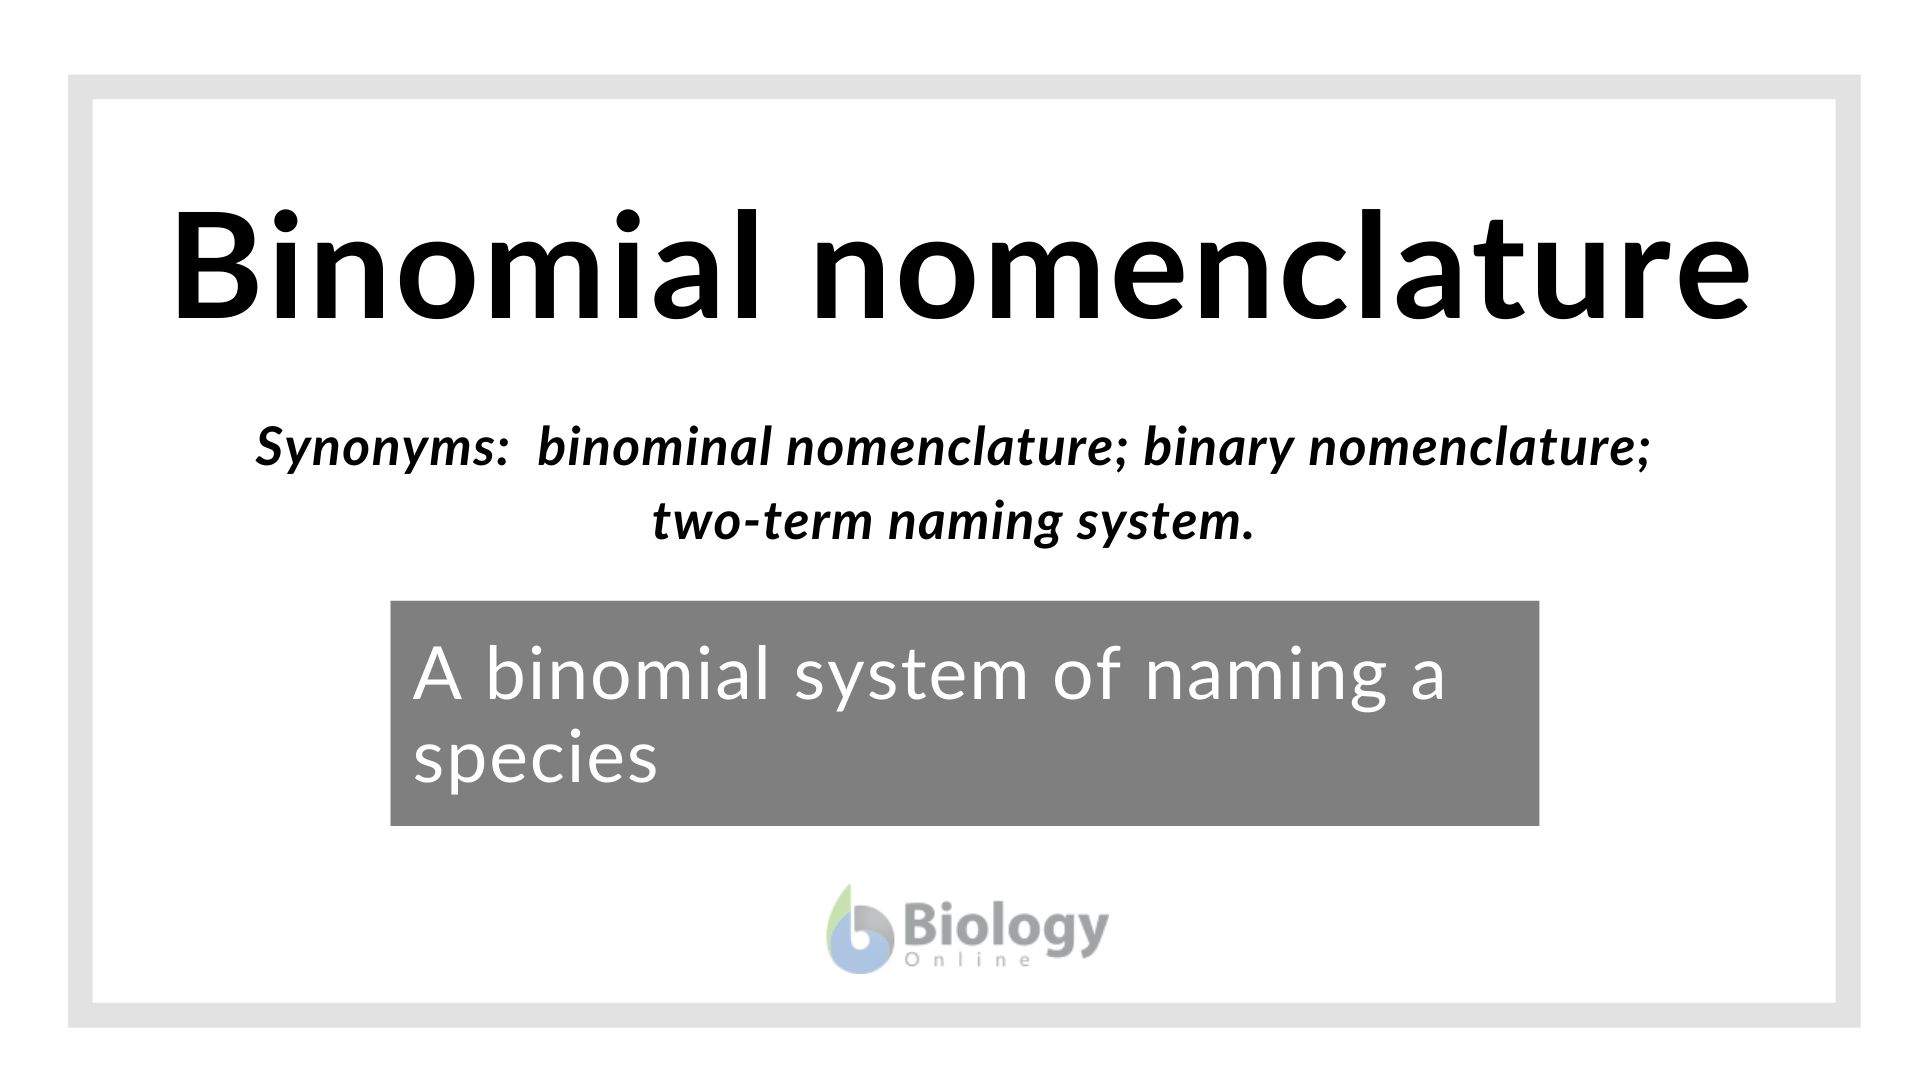 Binomial nomenclature - Definition and Examples - Biology Online